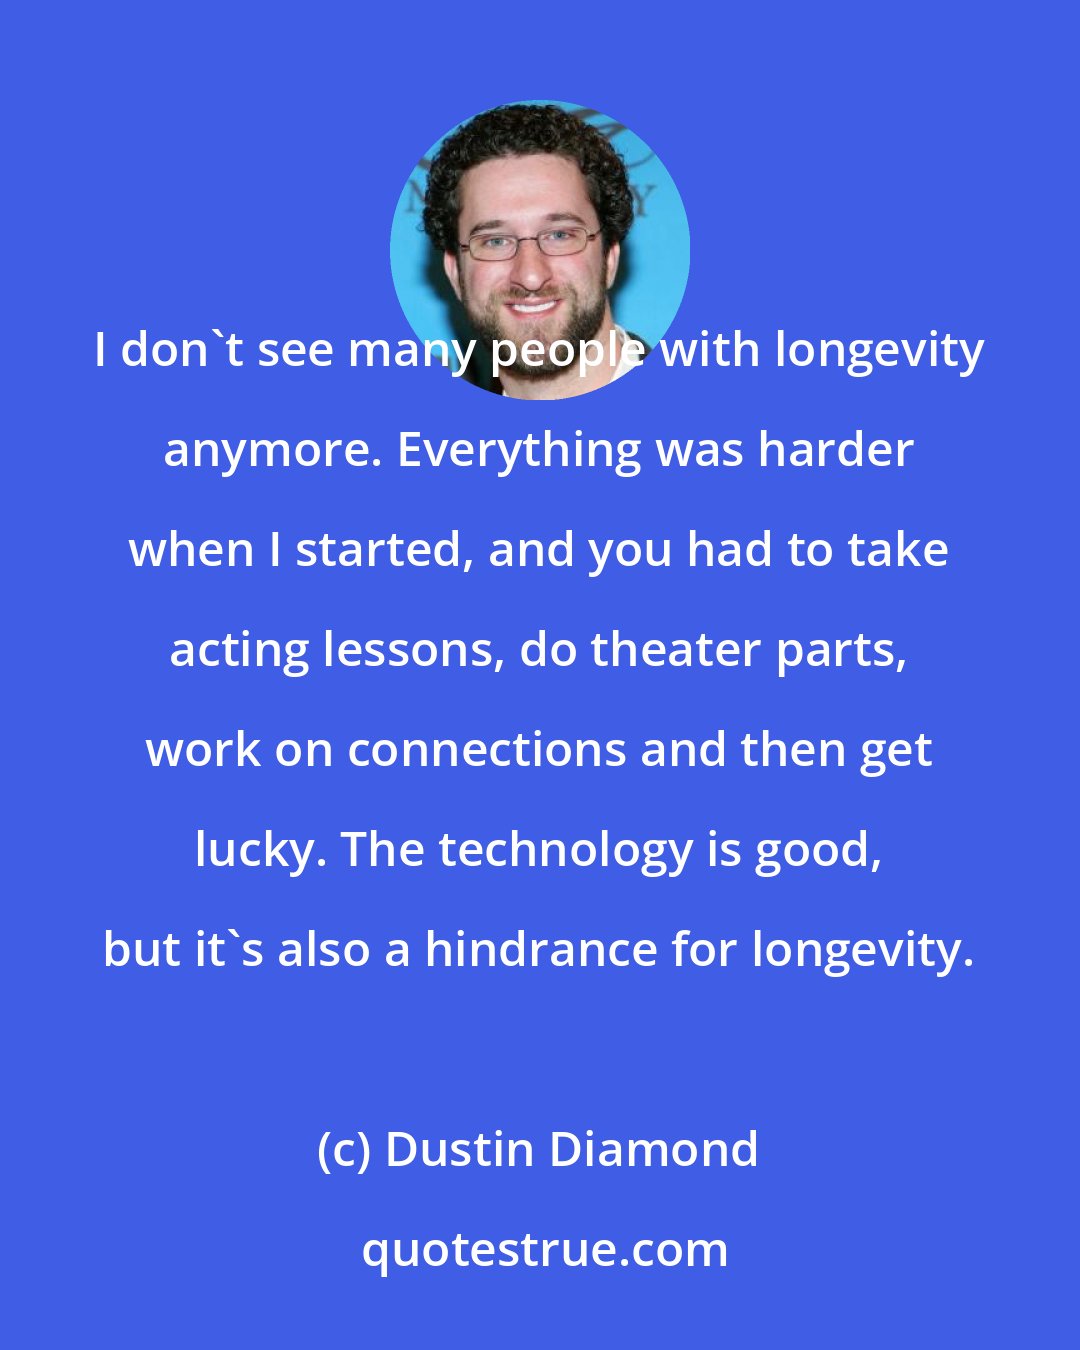 Dustin Diamond: I don't see many people with longevity anymore. Everything was harder when I started, and you had to take acting lessons, do theater parts, work on connections and then get lucky. The technology is good, but it's also a hindrance for longevity.